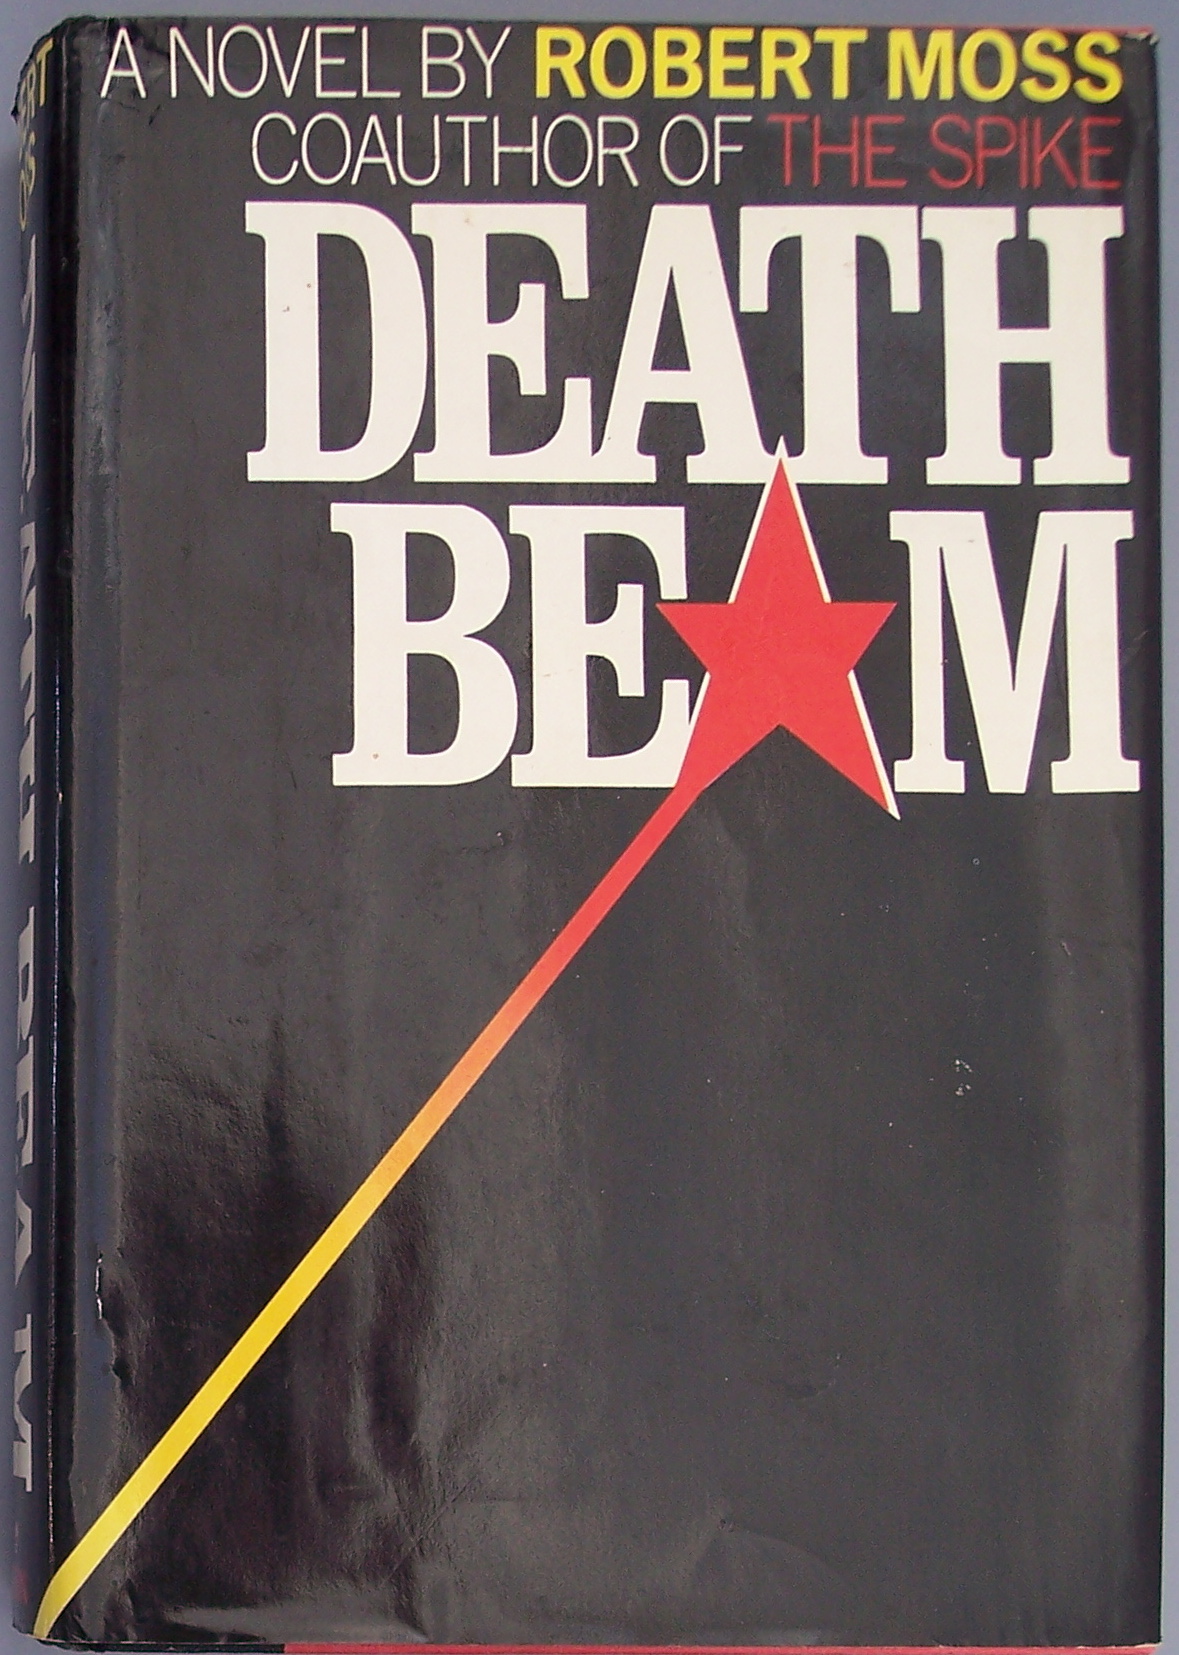 a book cover showing a bright red star on a black background